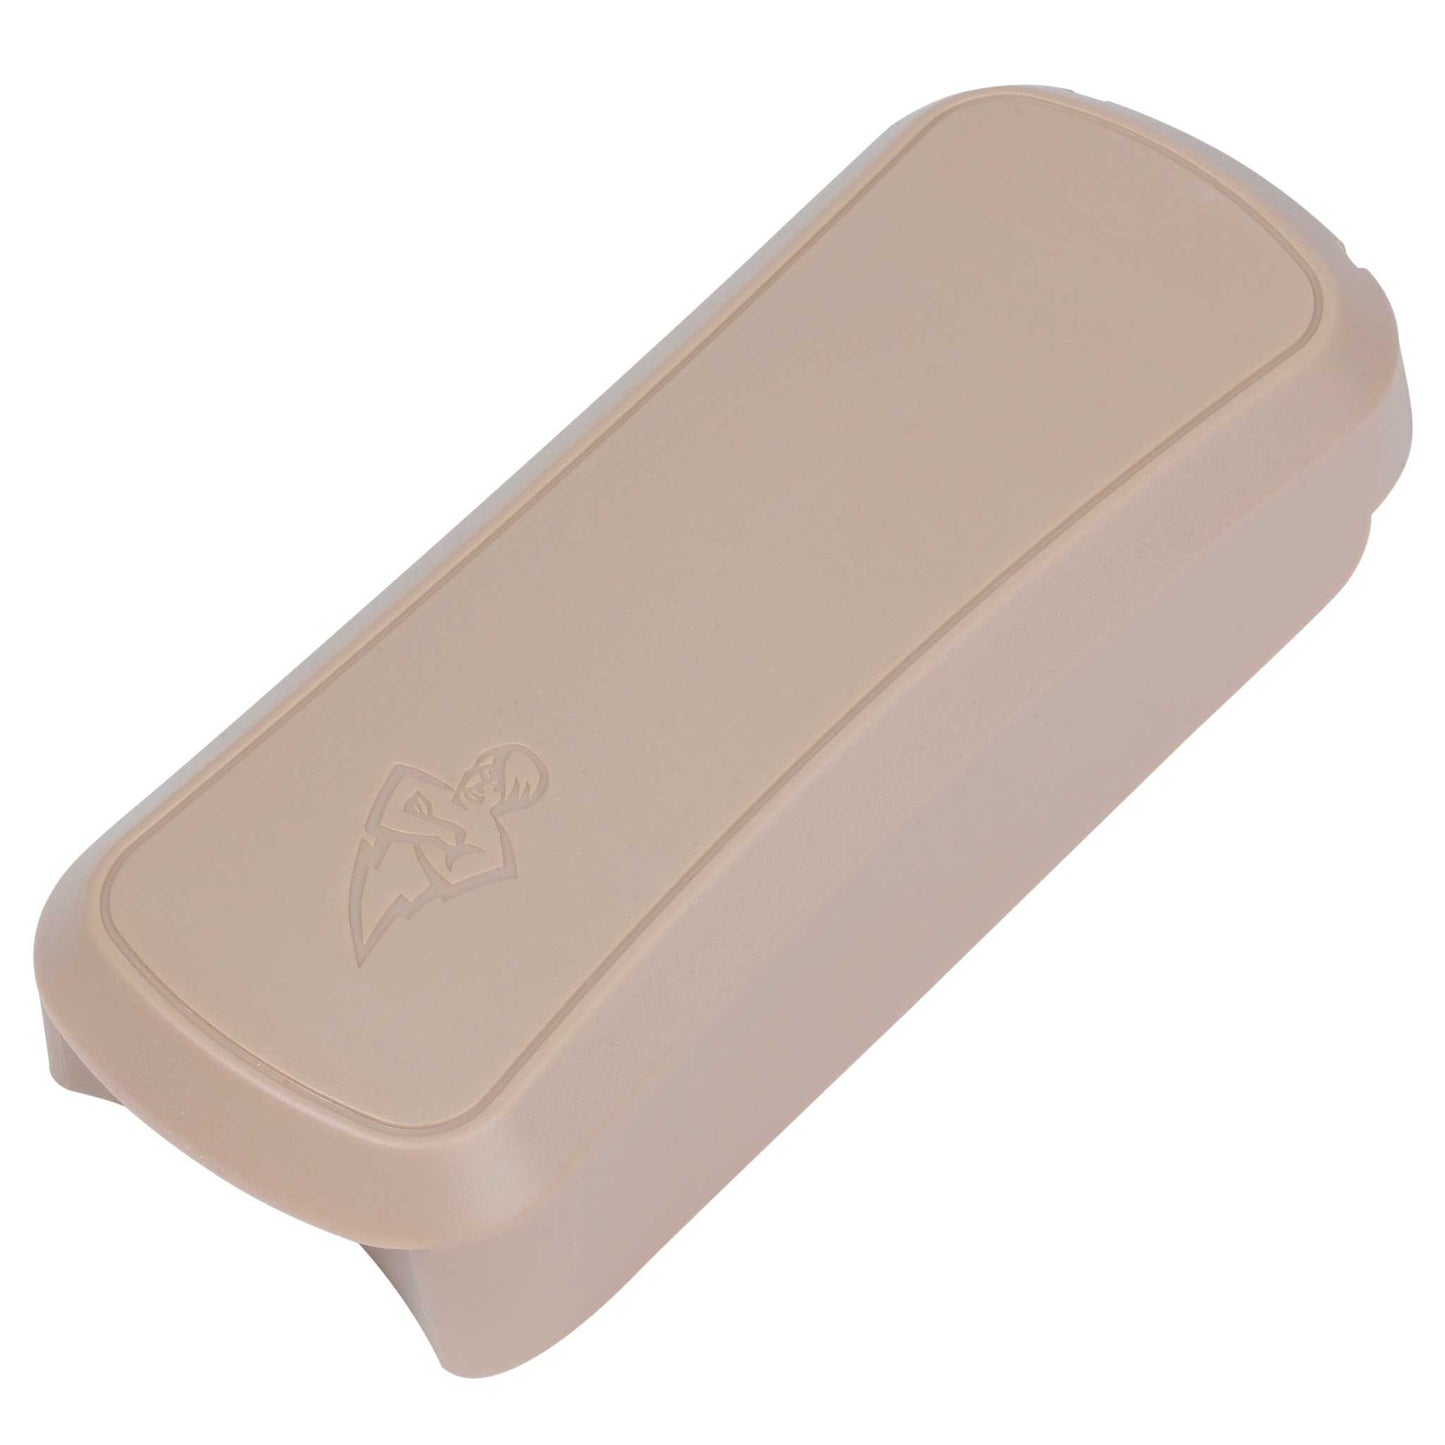 Tan Flip-Up Cover for Wireless Keyless Entry Pad (Cover Only) ,  Keypads - The Genie Company